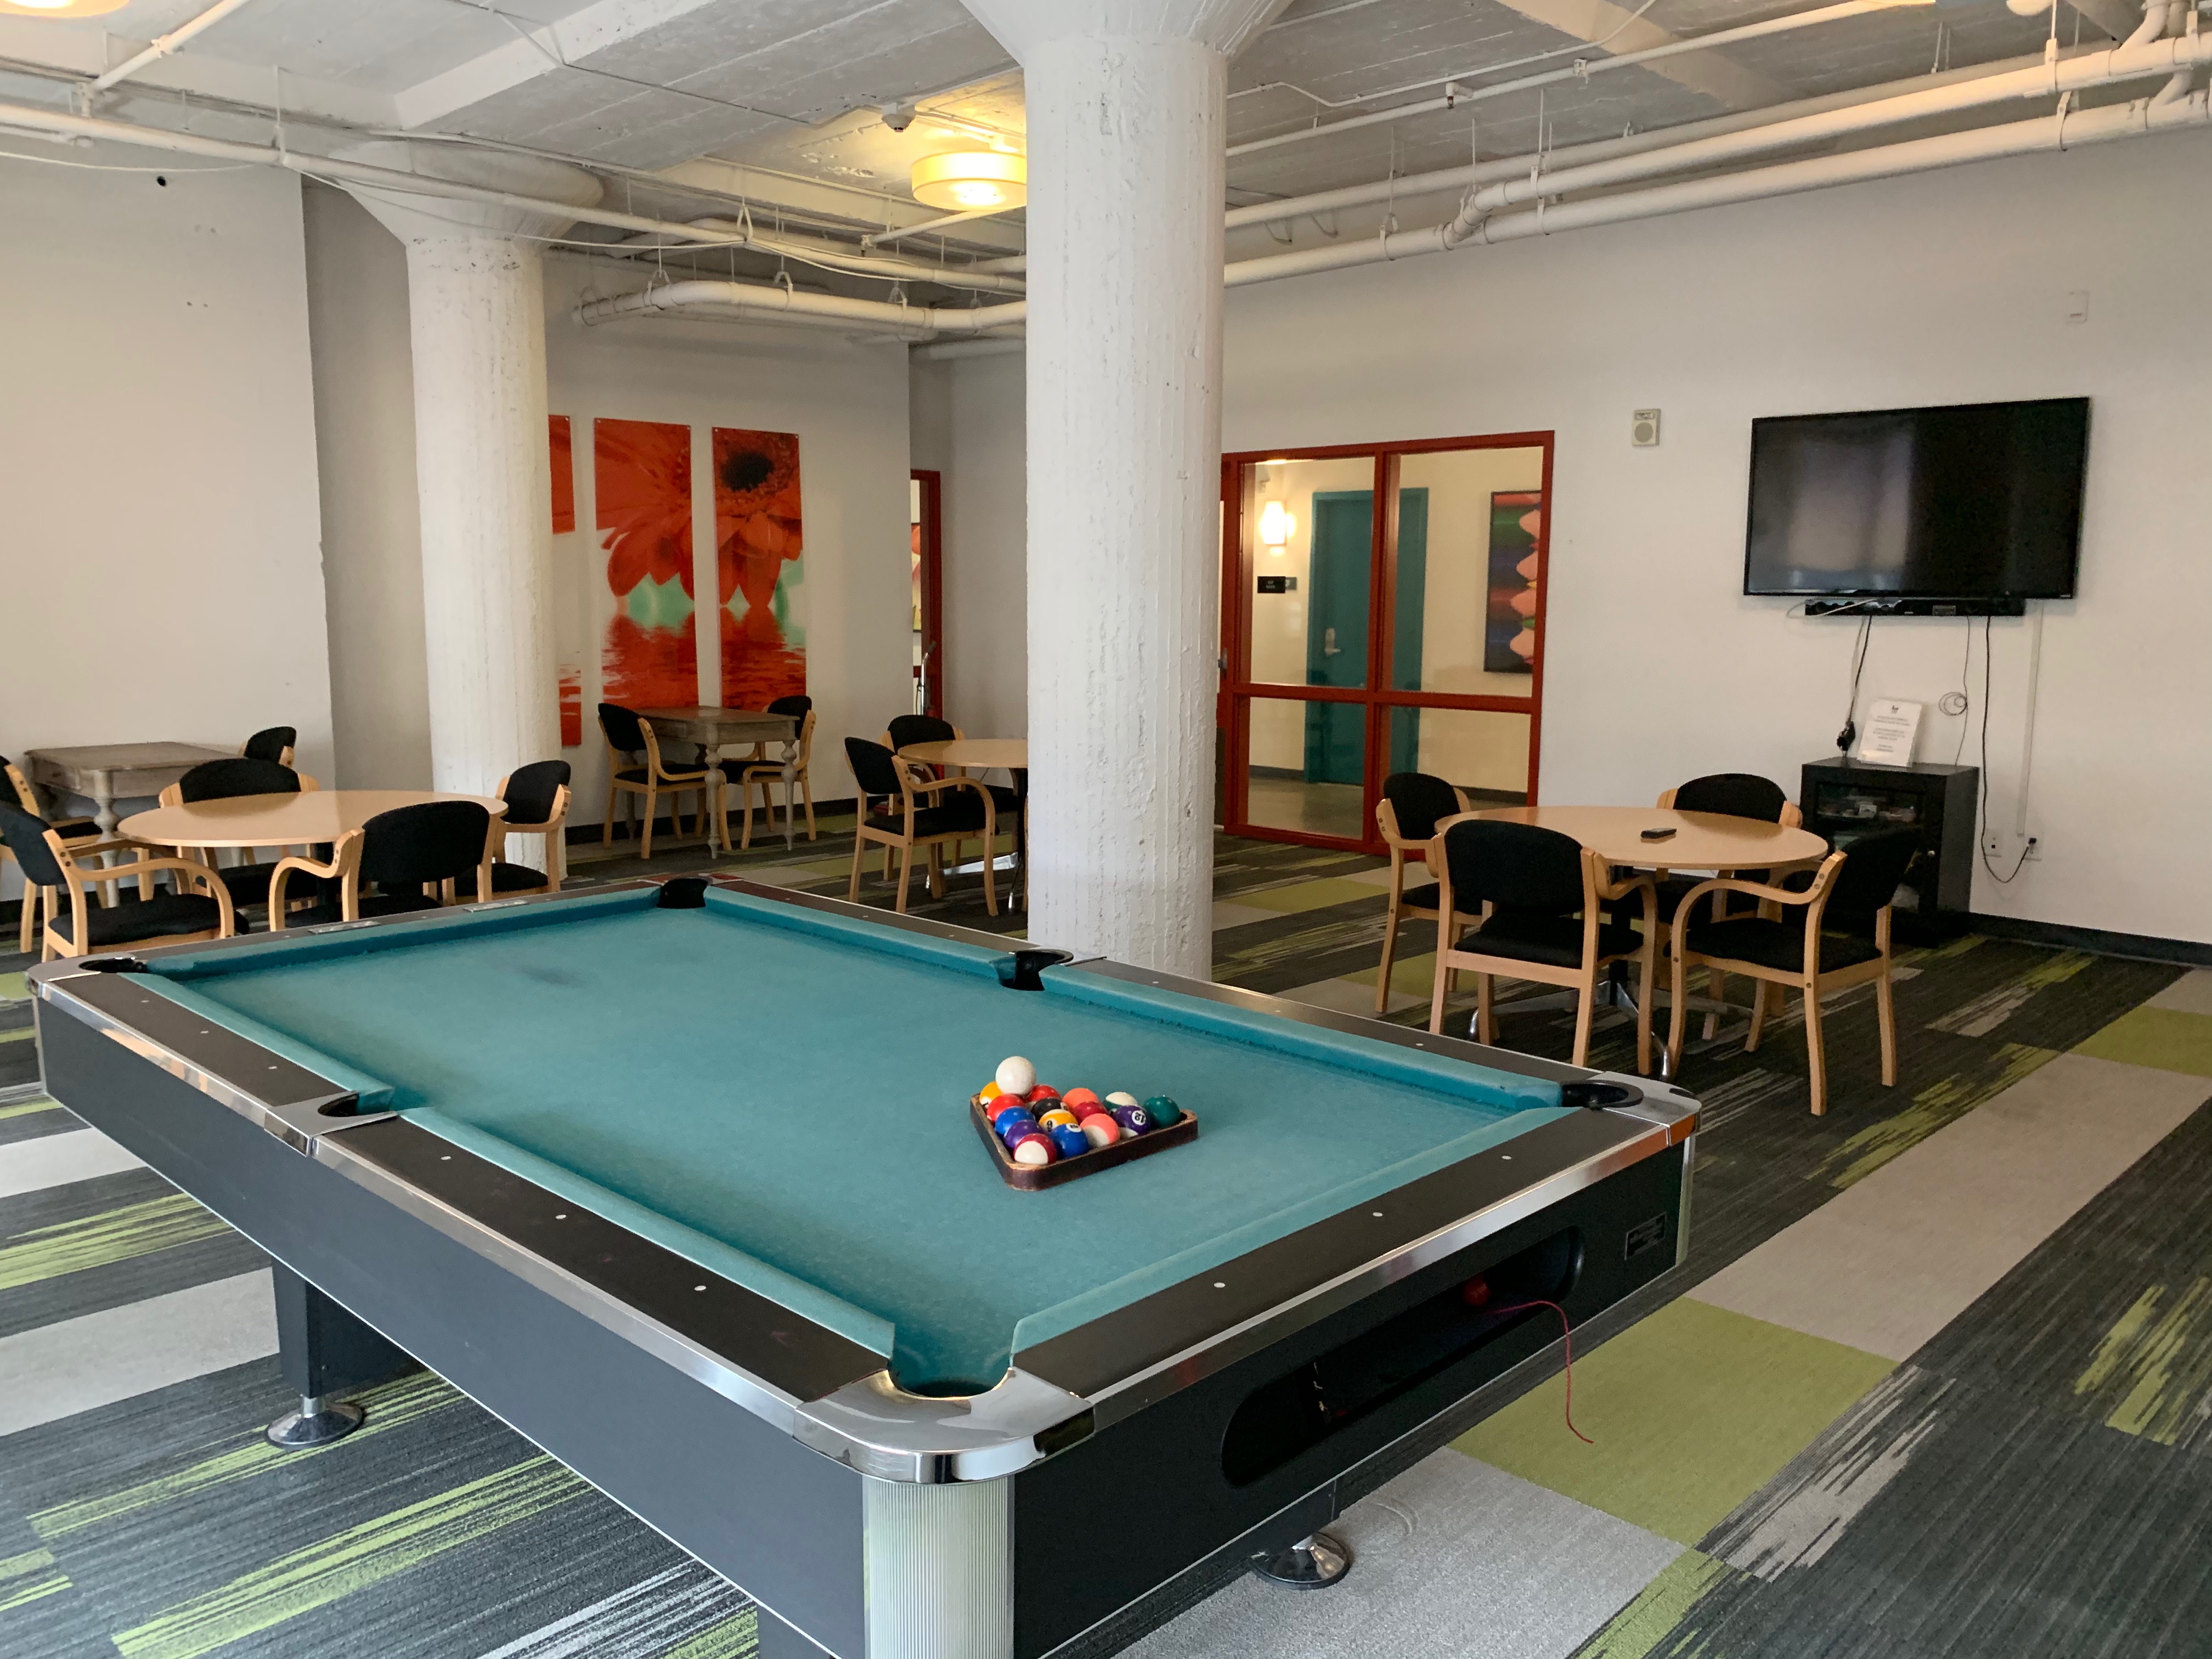 Inside view of a community room. There is a pool table, a flat screen tv, and multiple tables with chairs.